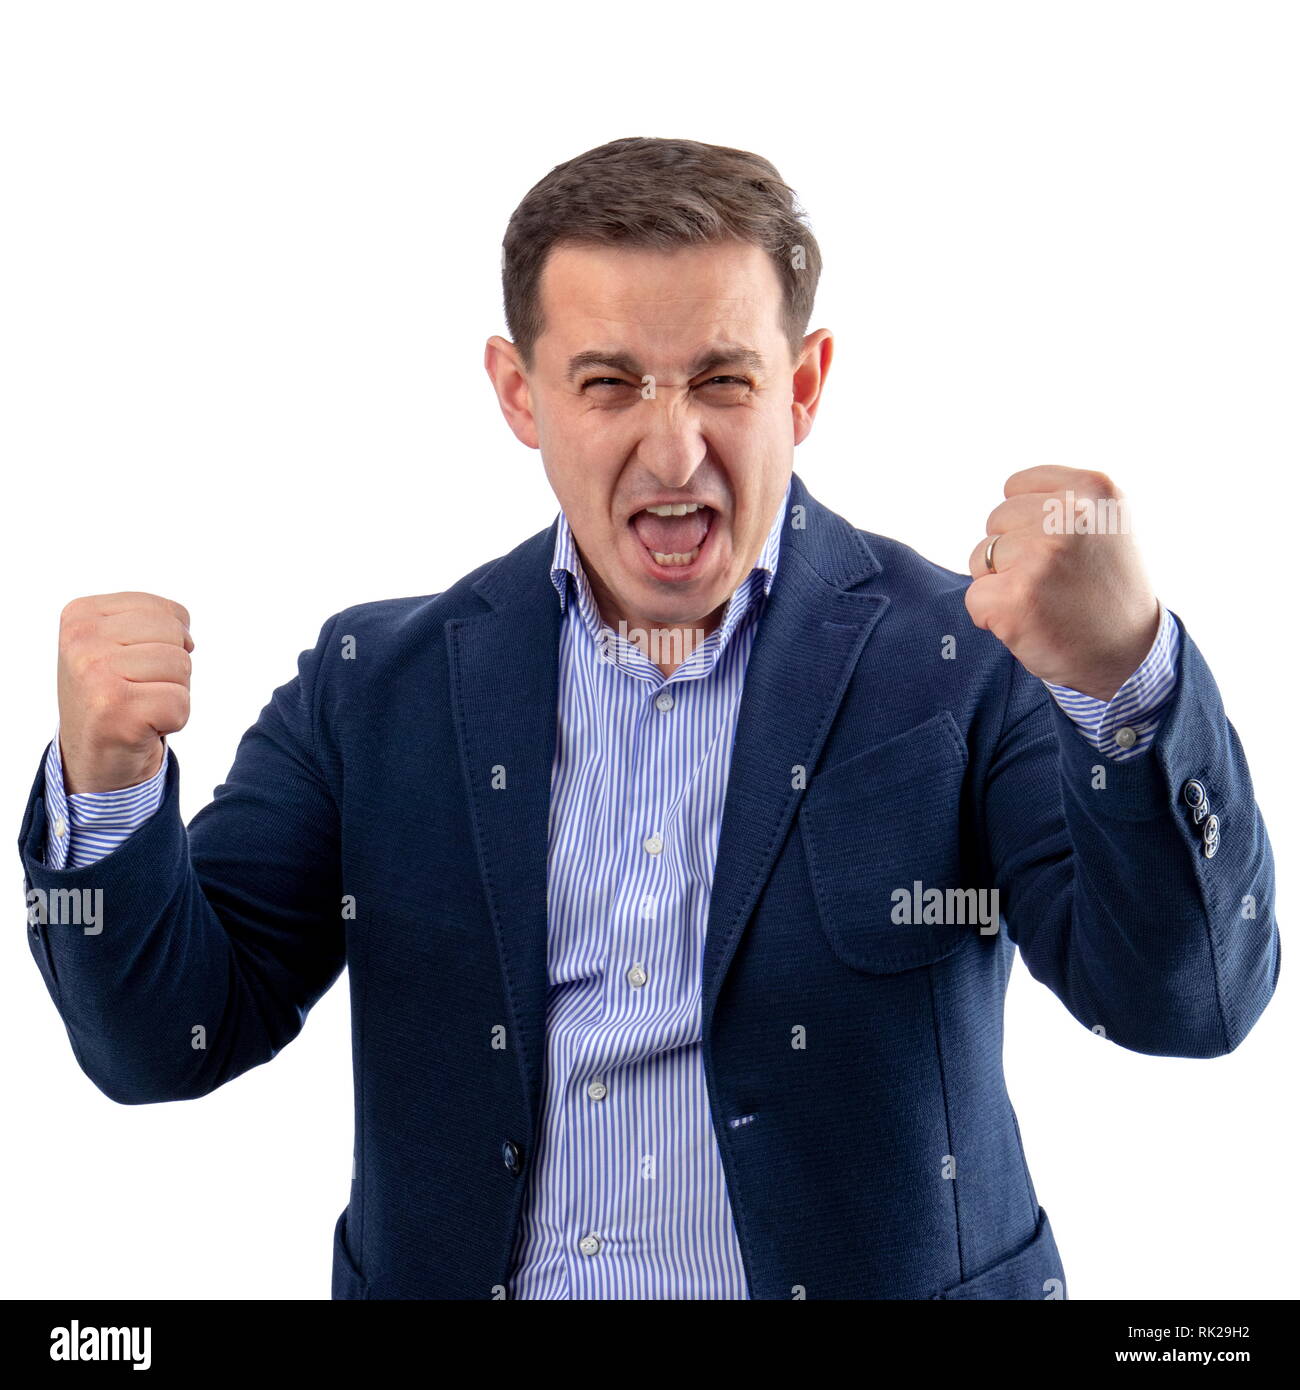 Businessman enjoying himself and shouting after a winning and successful business fight Stock Photo